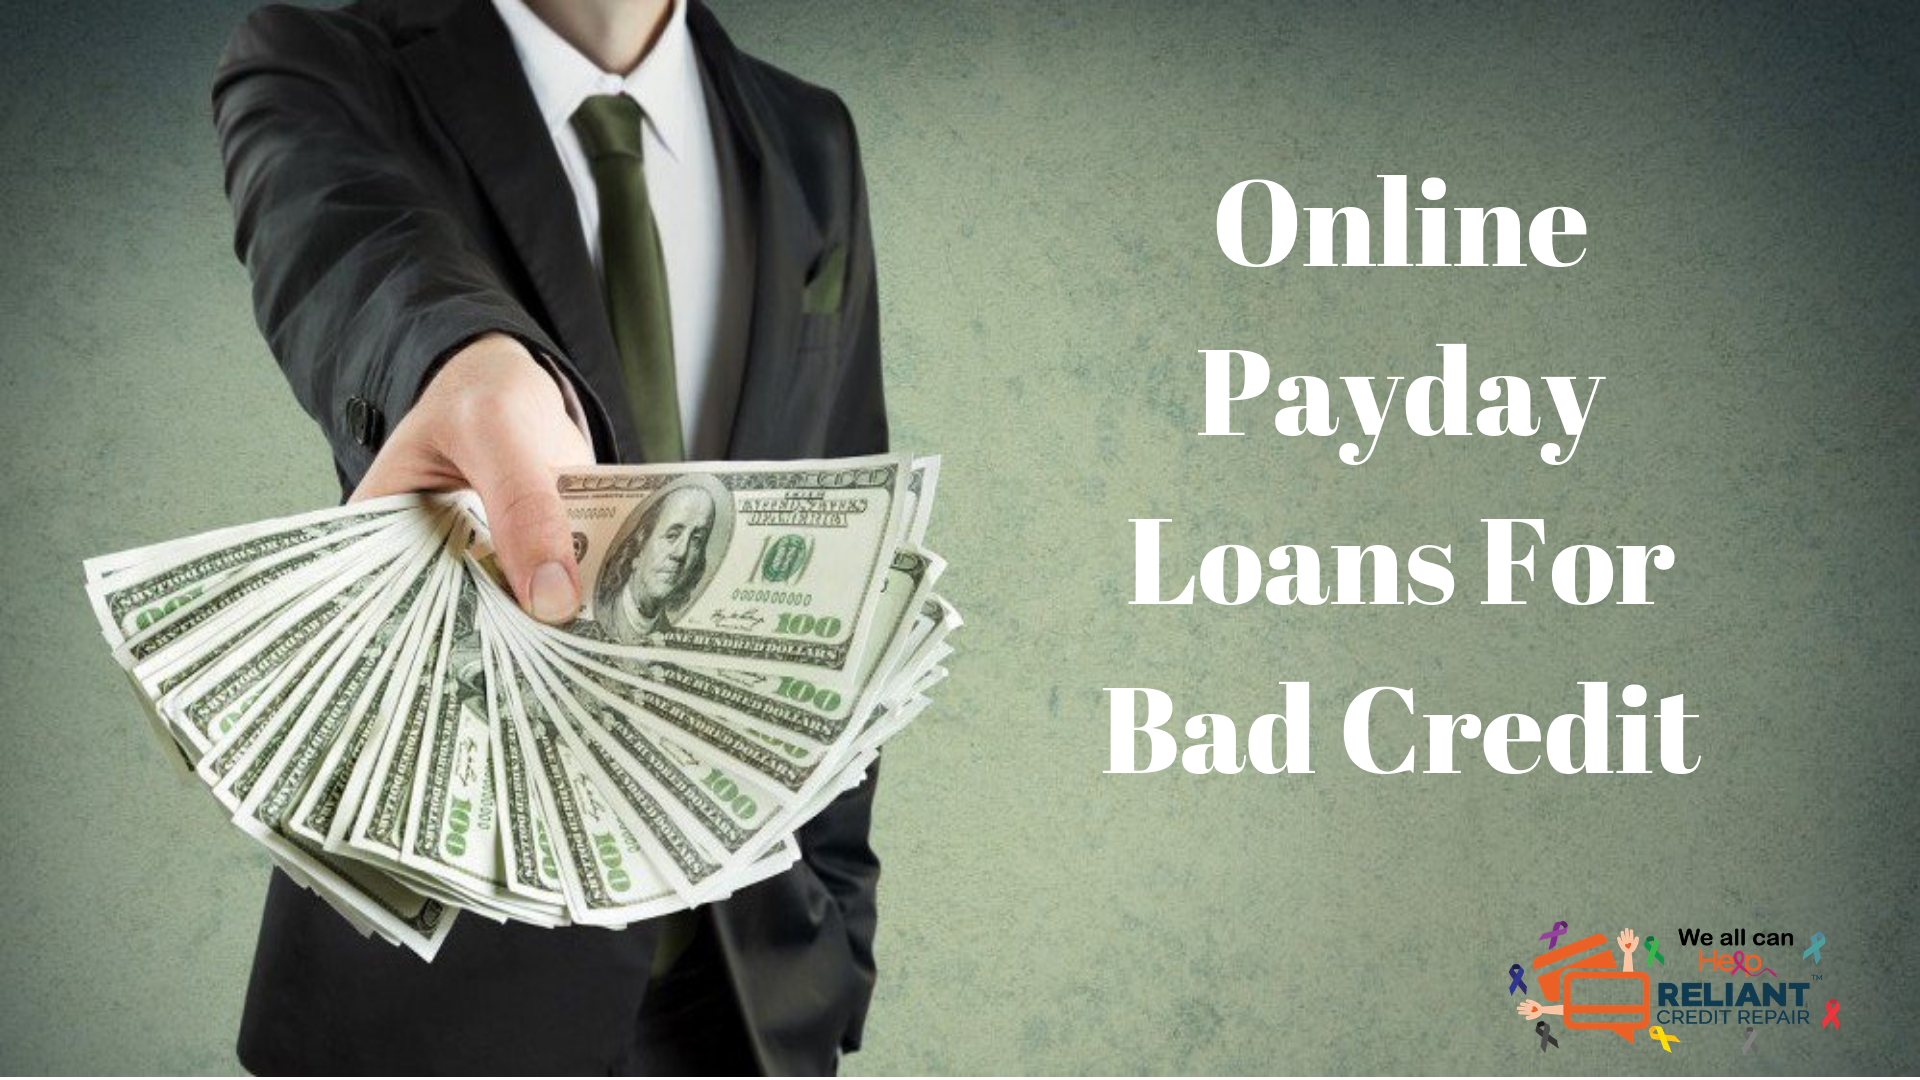 Best Personal Loans For Bad Credit (Credit Score Under 600)